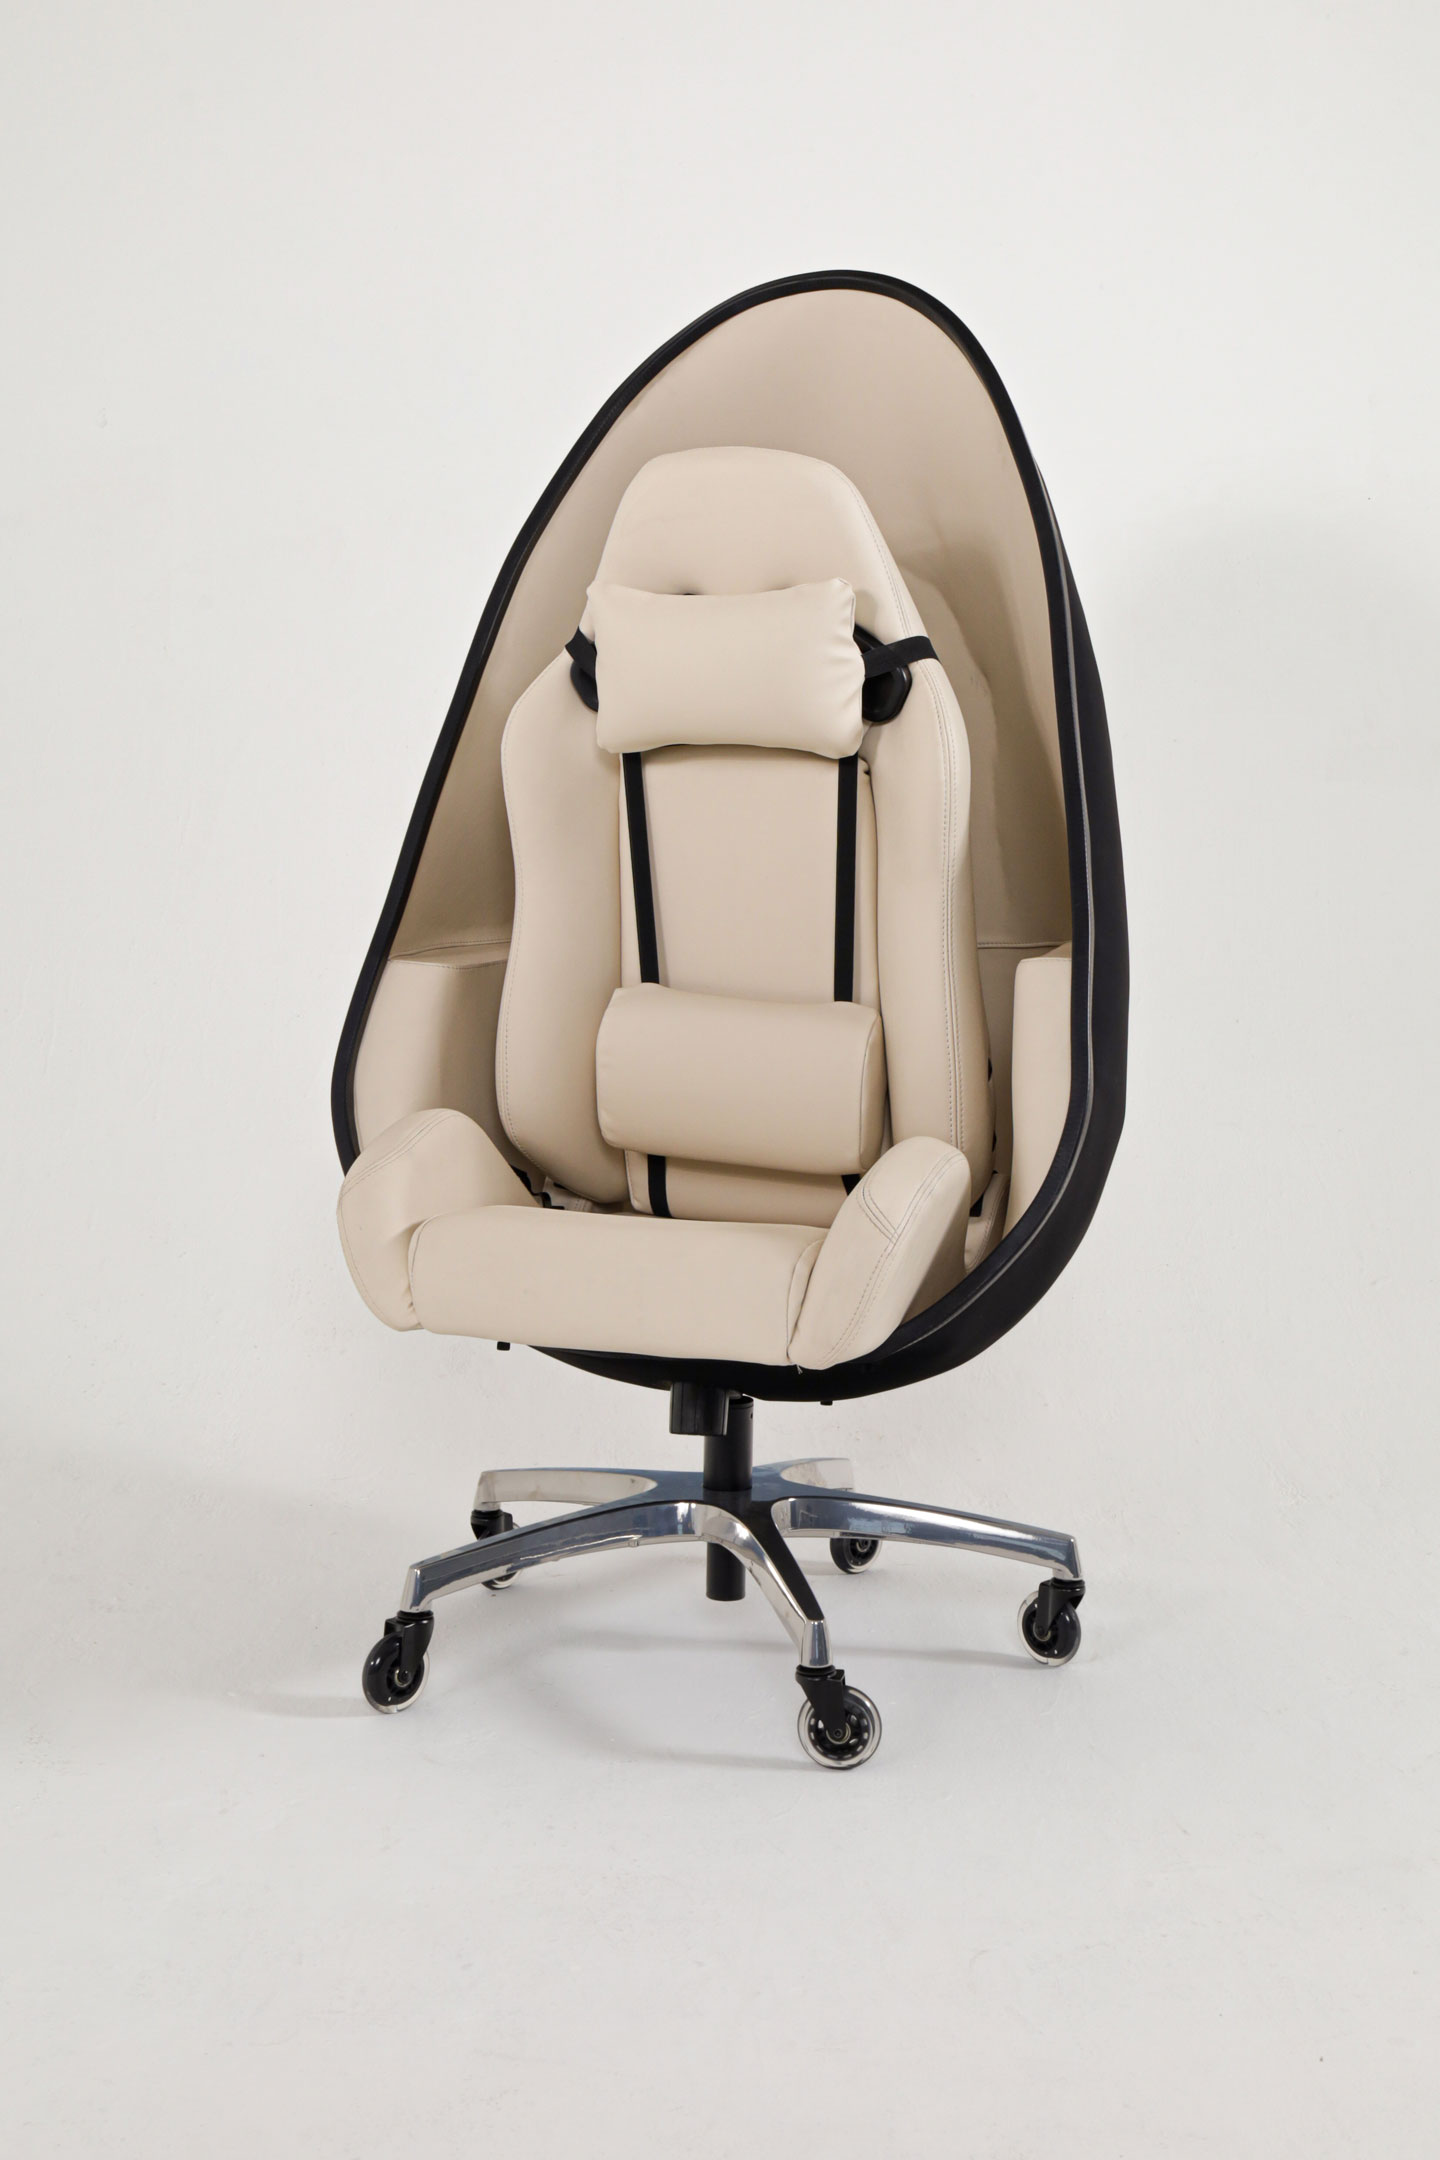 S5000 chair